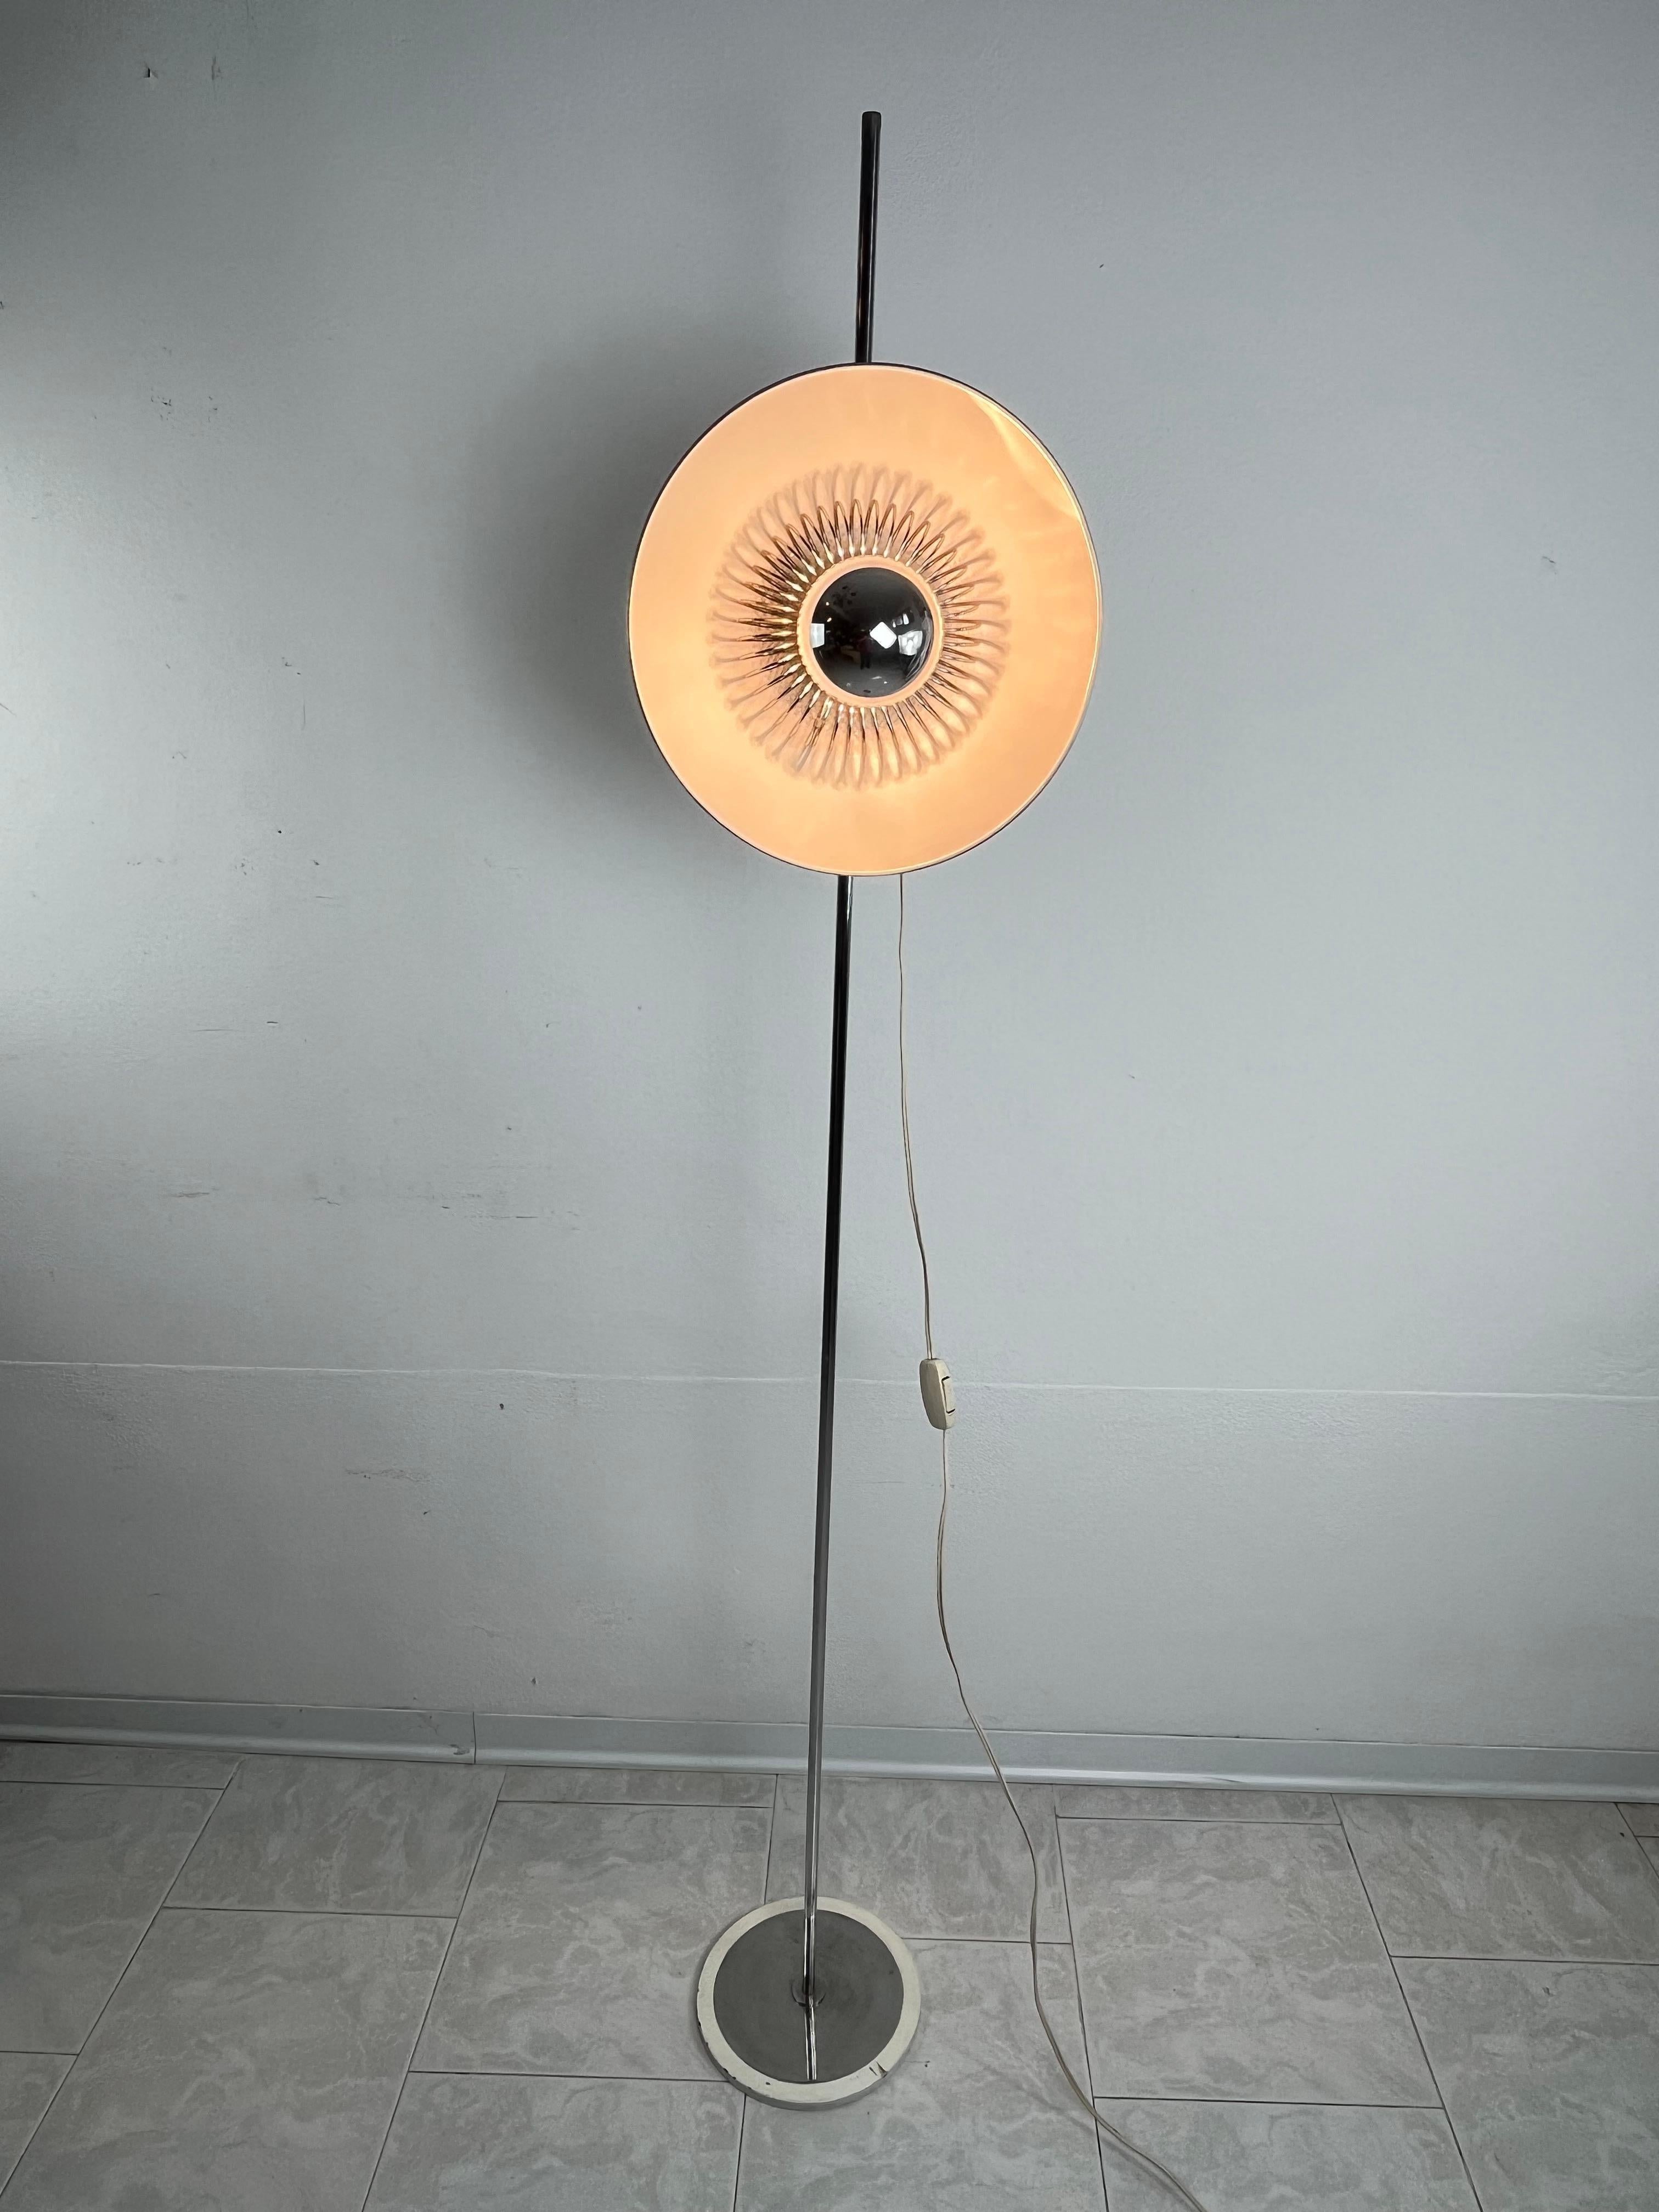 Mid-Century floor lamp attributed to Philippe Rogier for Oxar 1960s
Adjustable light thanks to a clamp that allows it to slide up and down. Entirely original and functional, chromed steel rod, aluminum lampshade. Marble base. E27 lamp. The lamp has